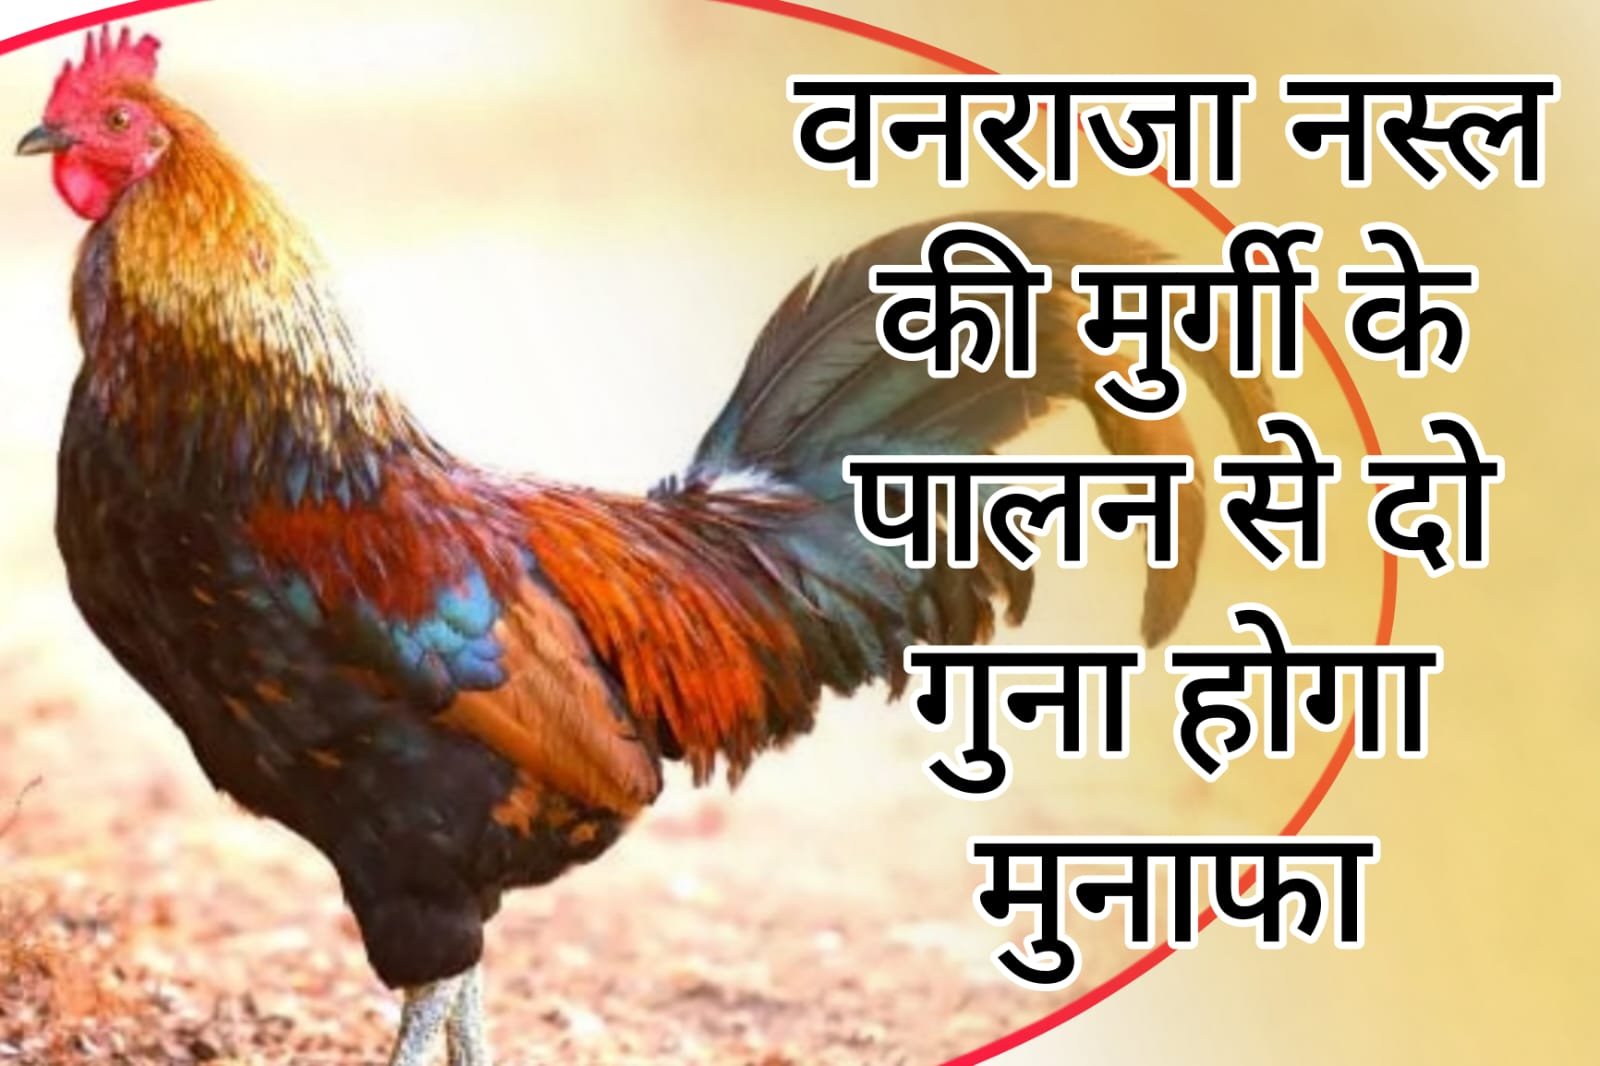 POULTRY FARMING - Rearing of Vanraja breed of chicken will give double the profit.